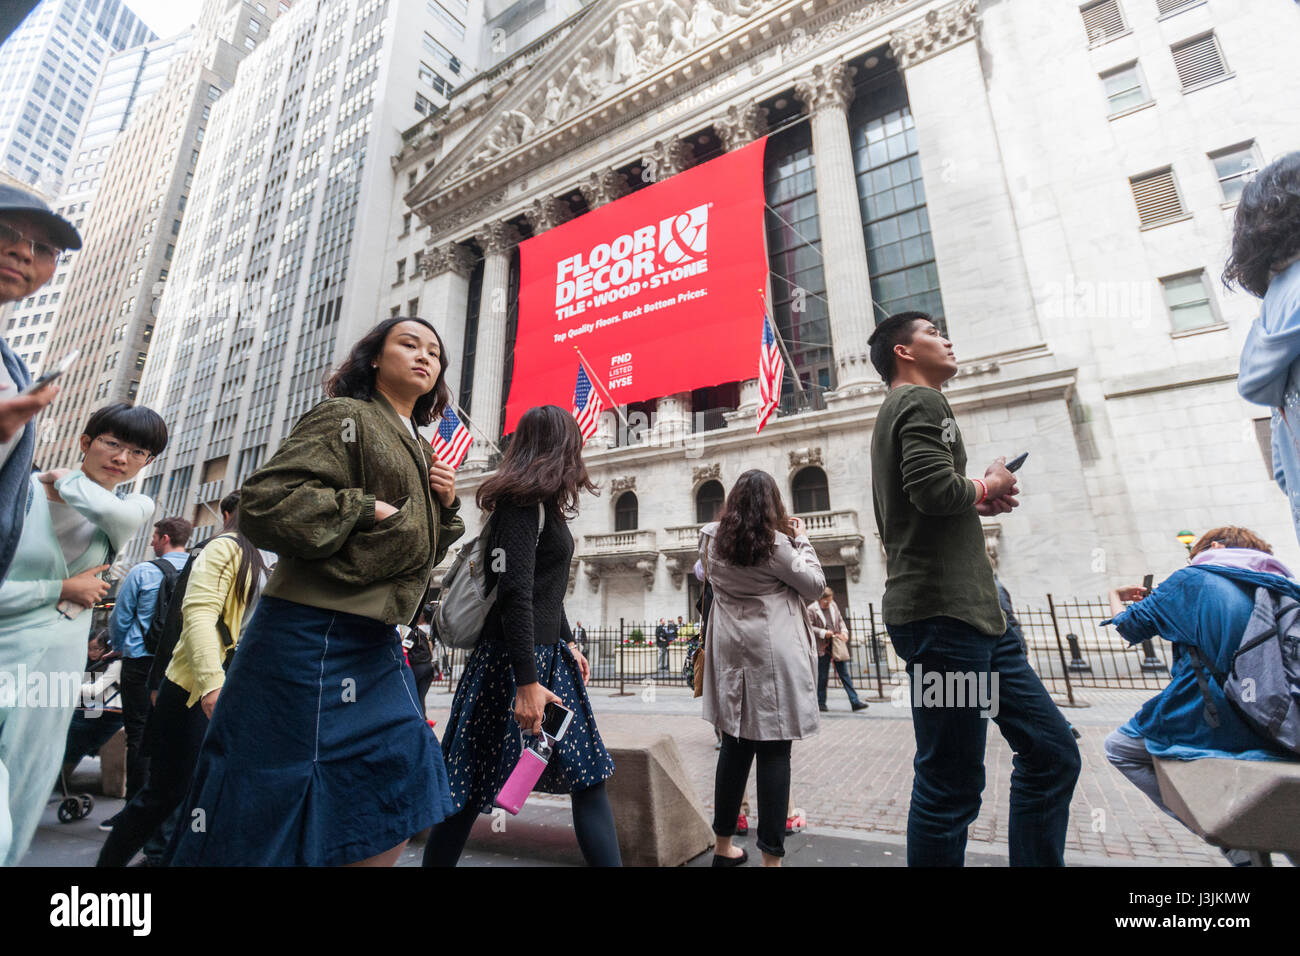 New York Stock Exchange Trading Floor High Resolution Stock Photography and  Images - Alamy